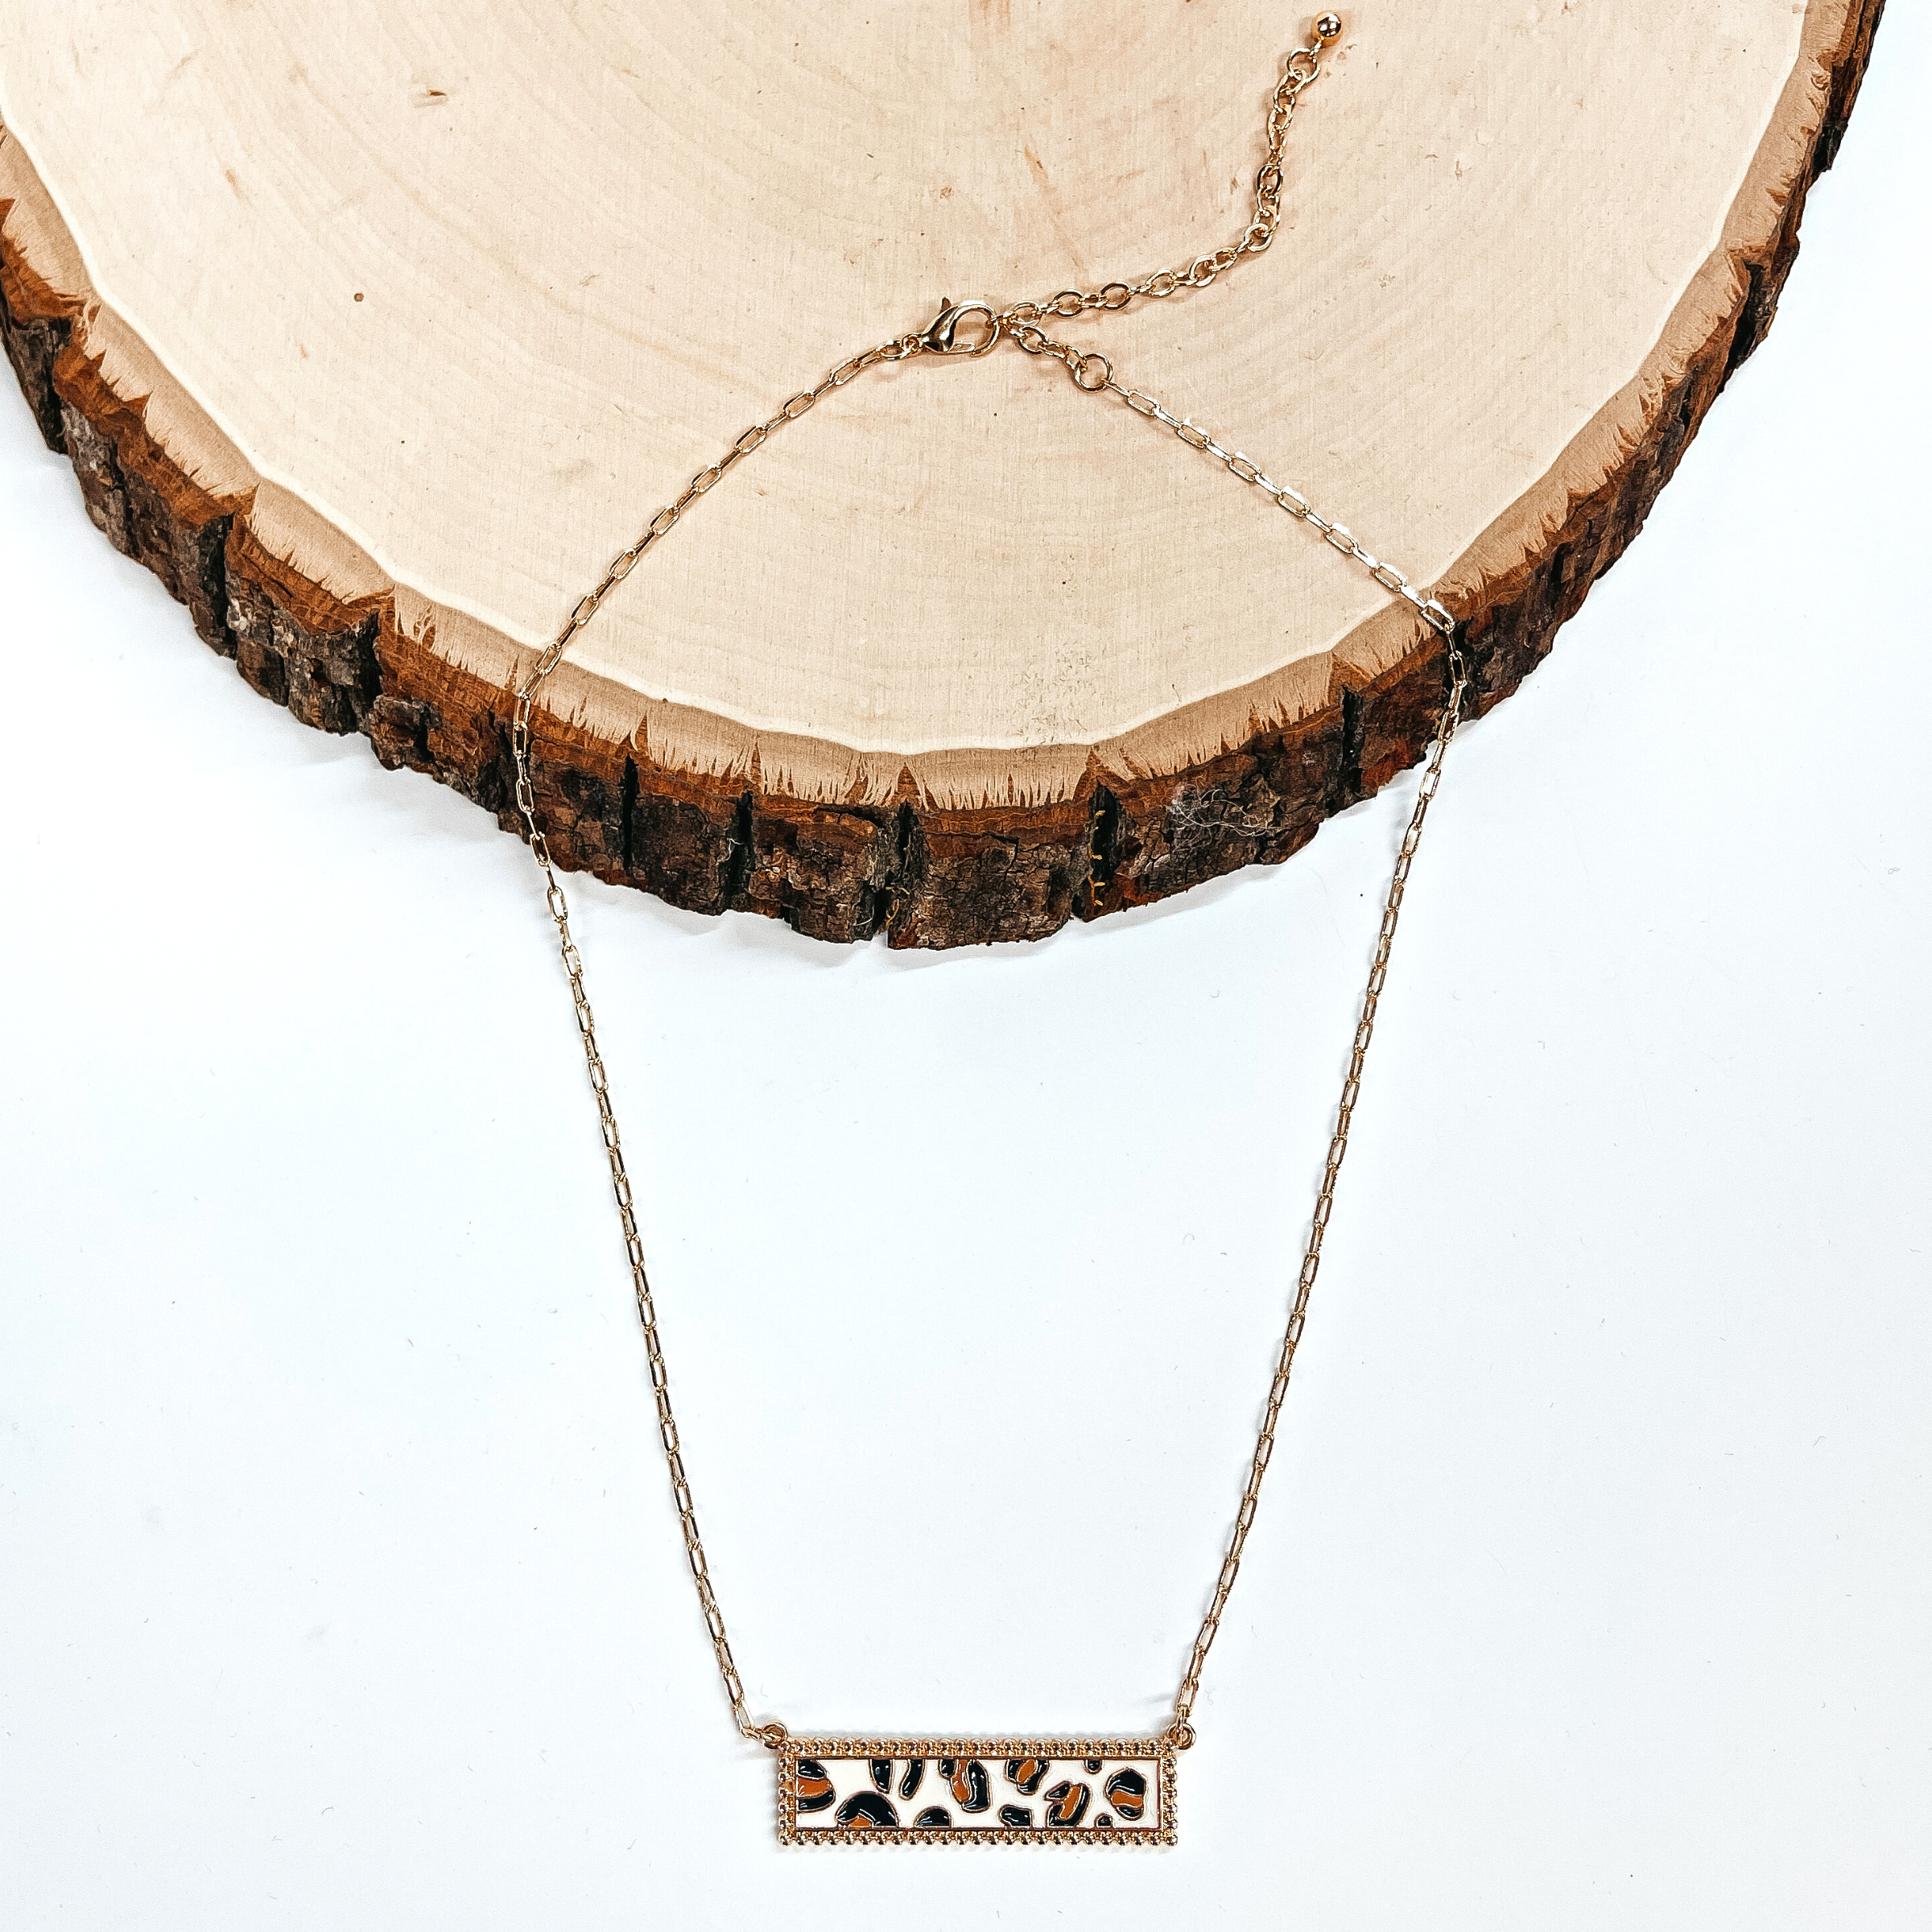 This is a thin gold tone chain necklace with a rectangle bar pendant in black,brown, and  white/ivory leopard print. The black, brown, white/ivory leopard print rectangle bar is  in a gold tone setting. This necklace is taken laying on a white background and a slab of wood.